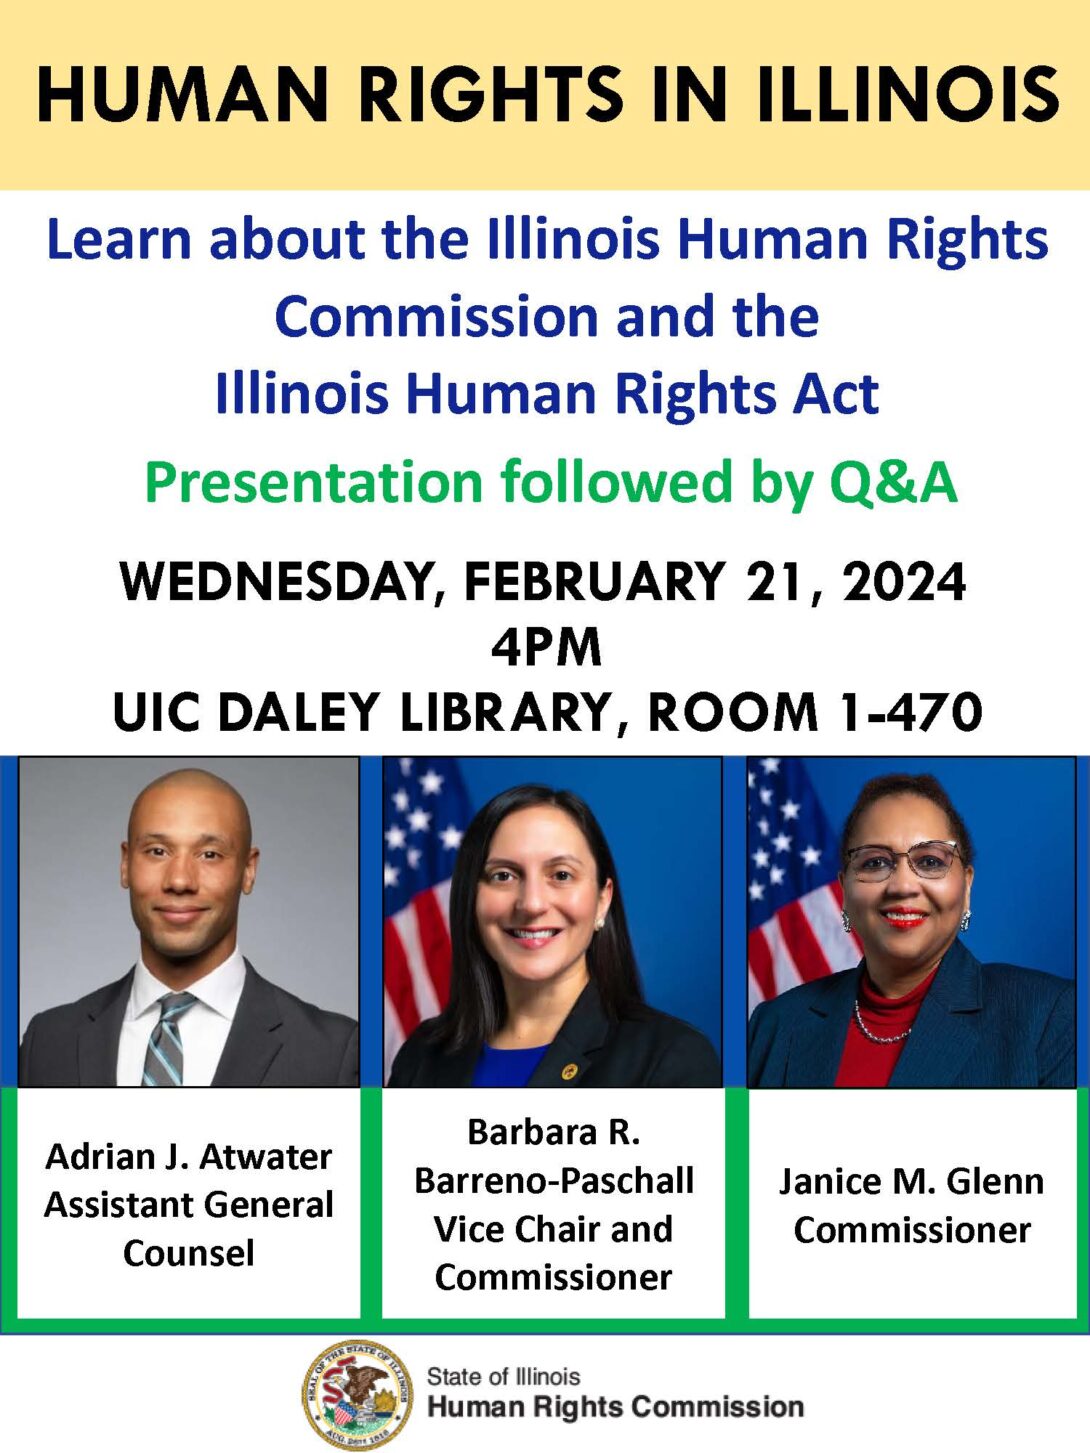 Illinois Human Rights Commission flyer for February 21, 2024 UIC presentation